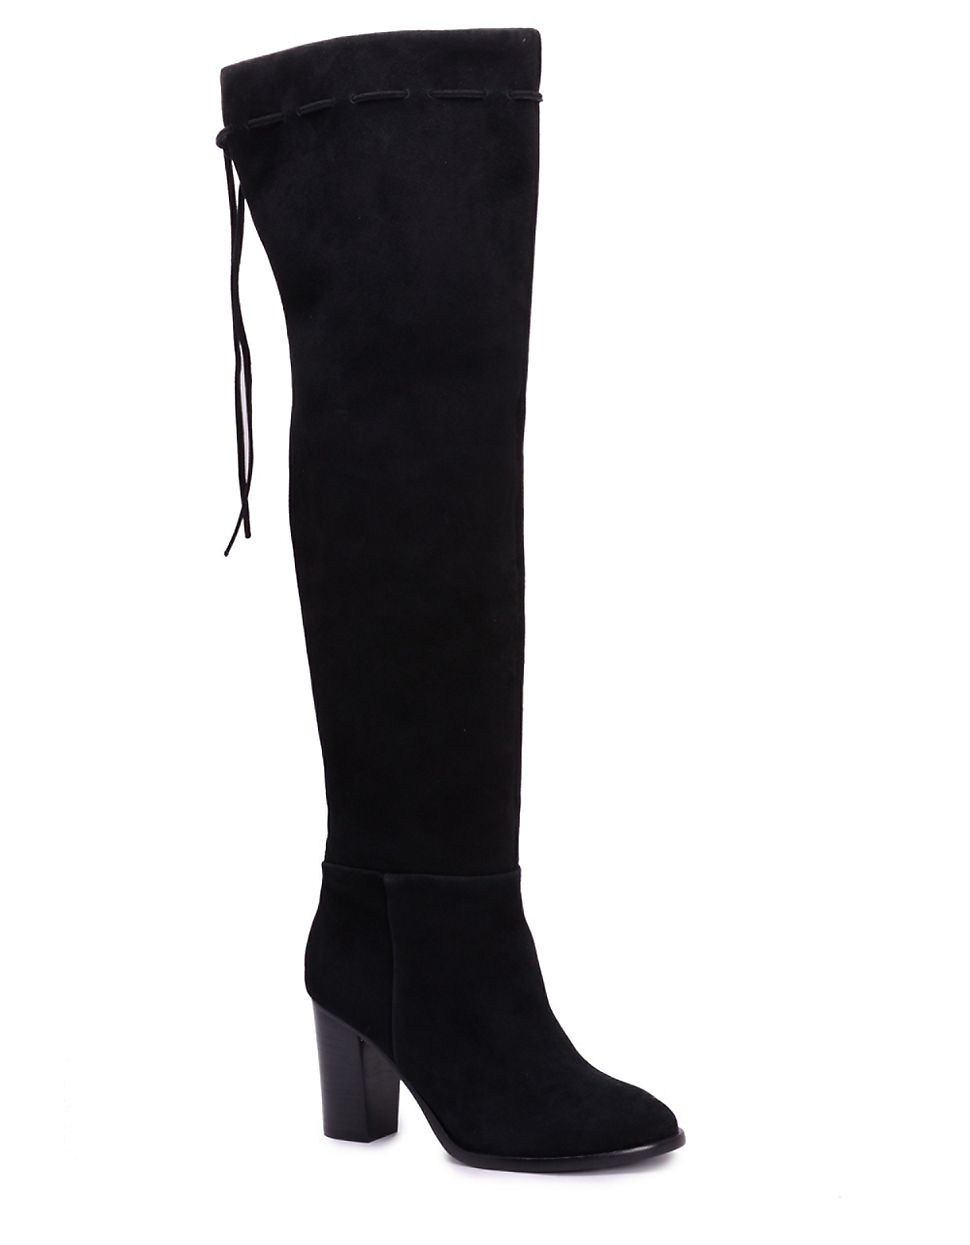 Lyst - Splendid Polly Over The Knee Boots - Smoke in Black